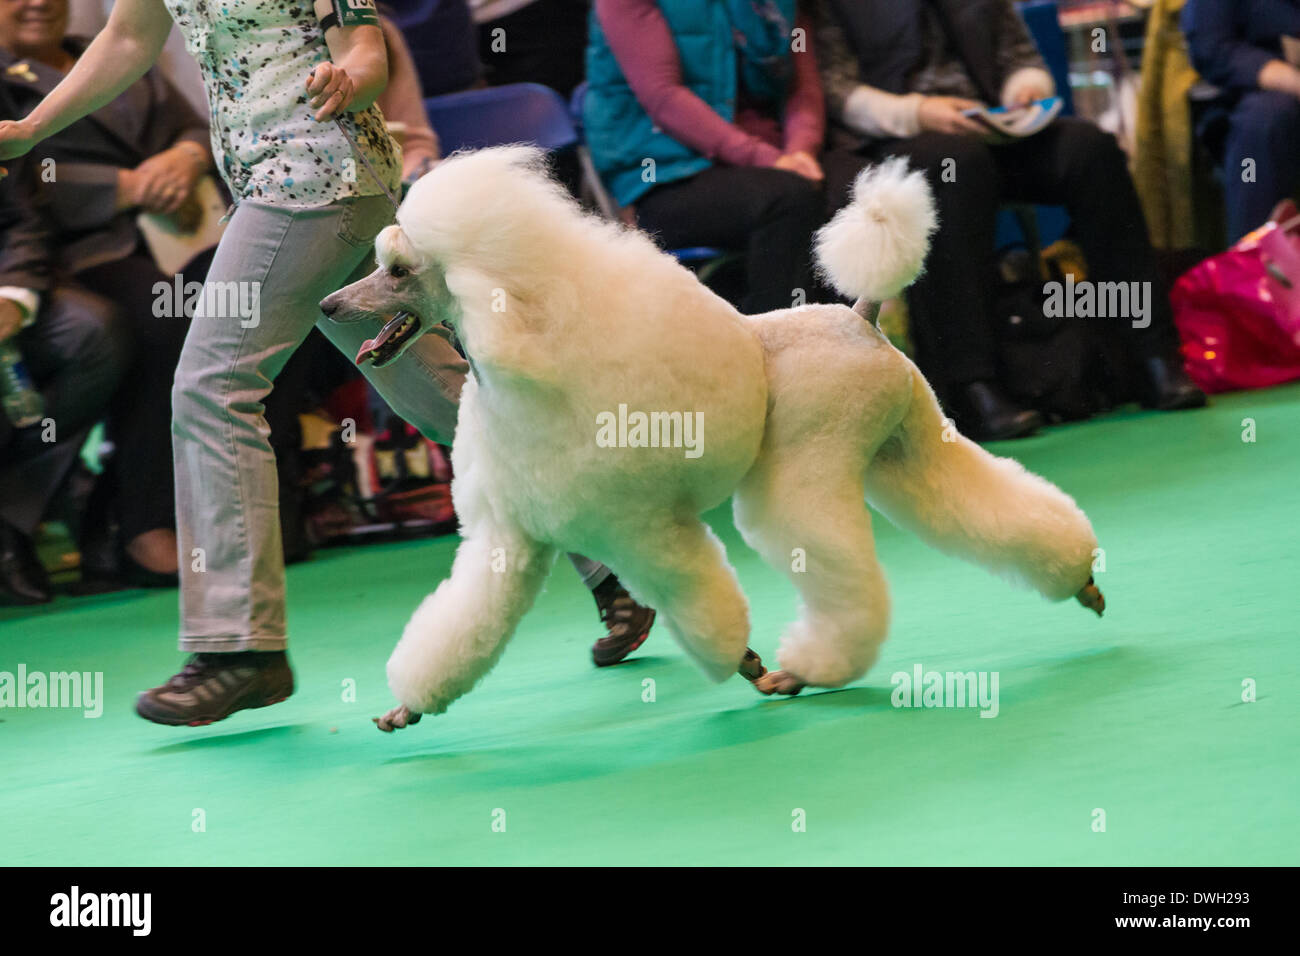 Photo's taken at the 2014 Crufts show in Birmingham UK Stock Photo